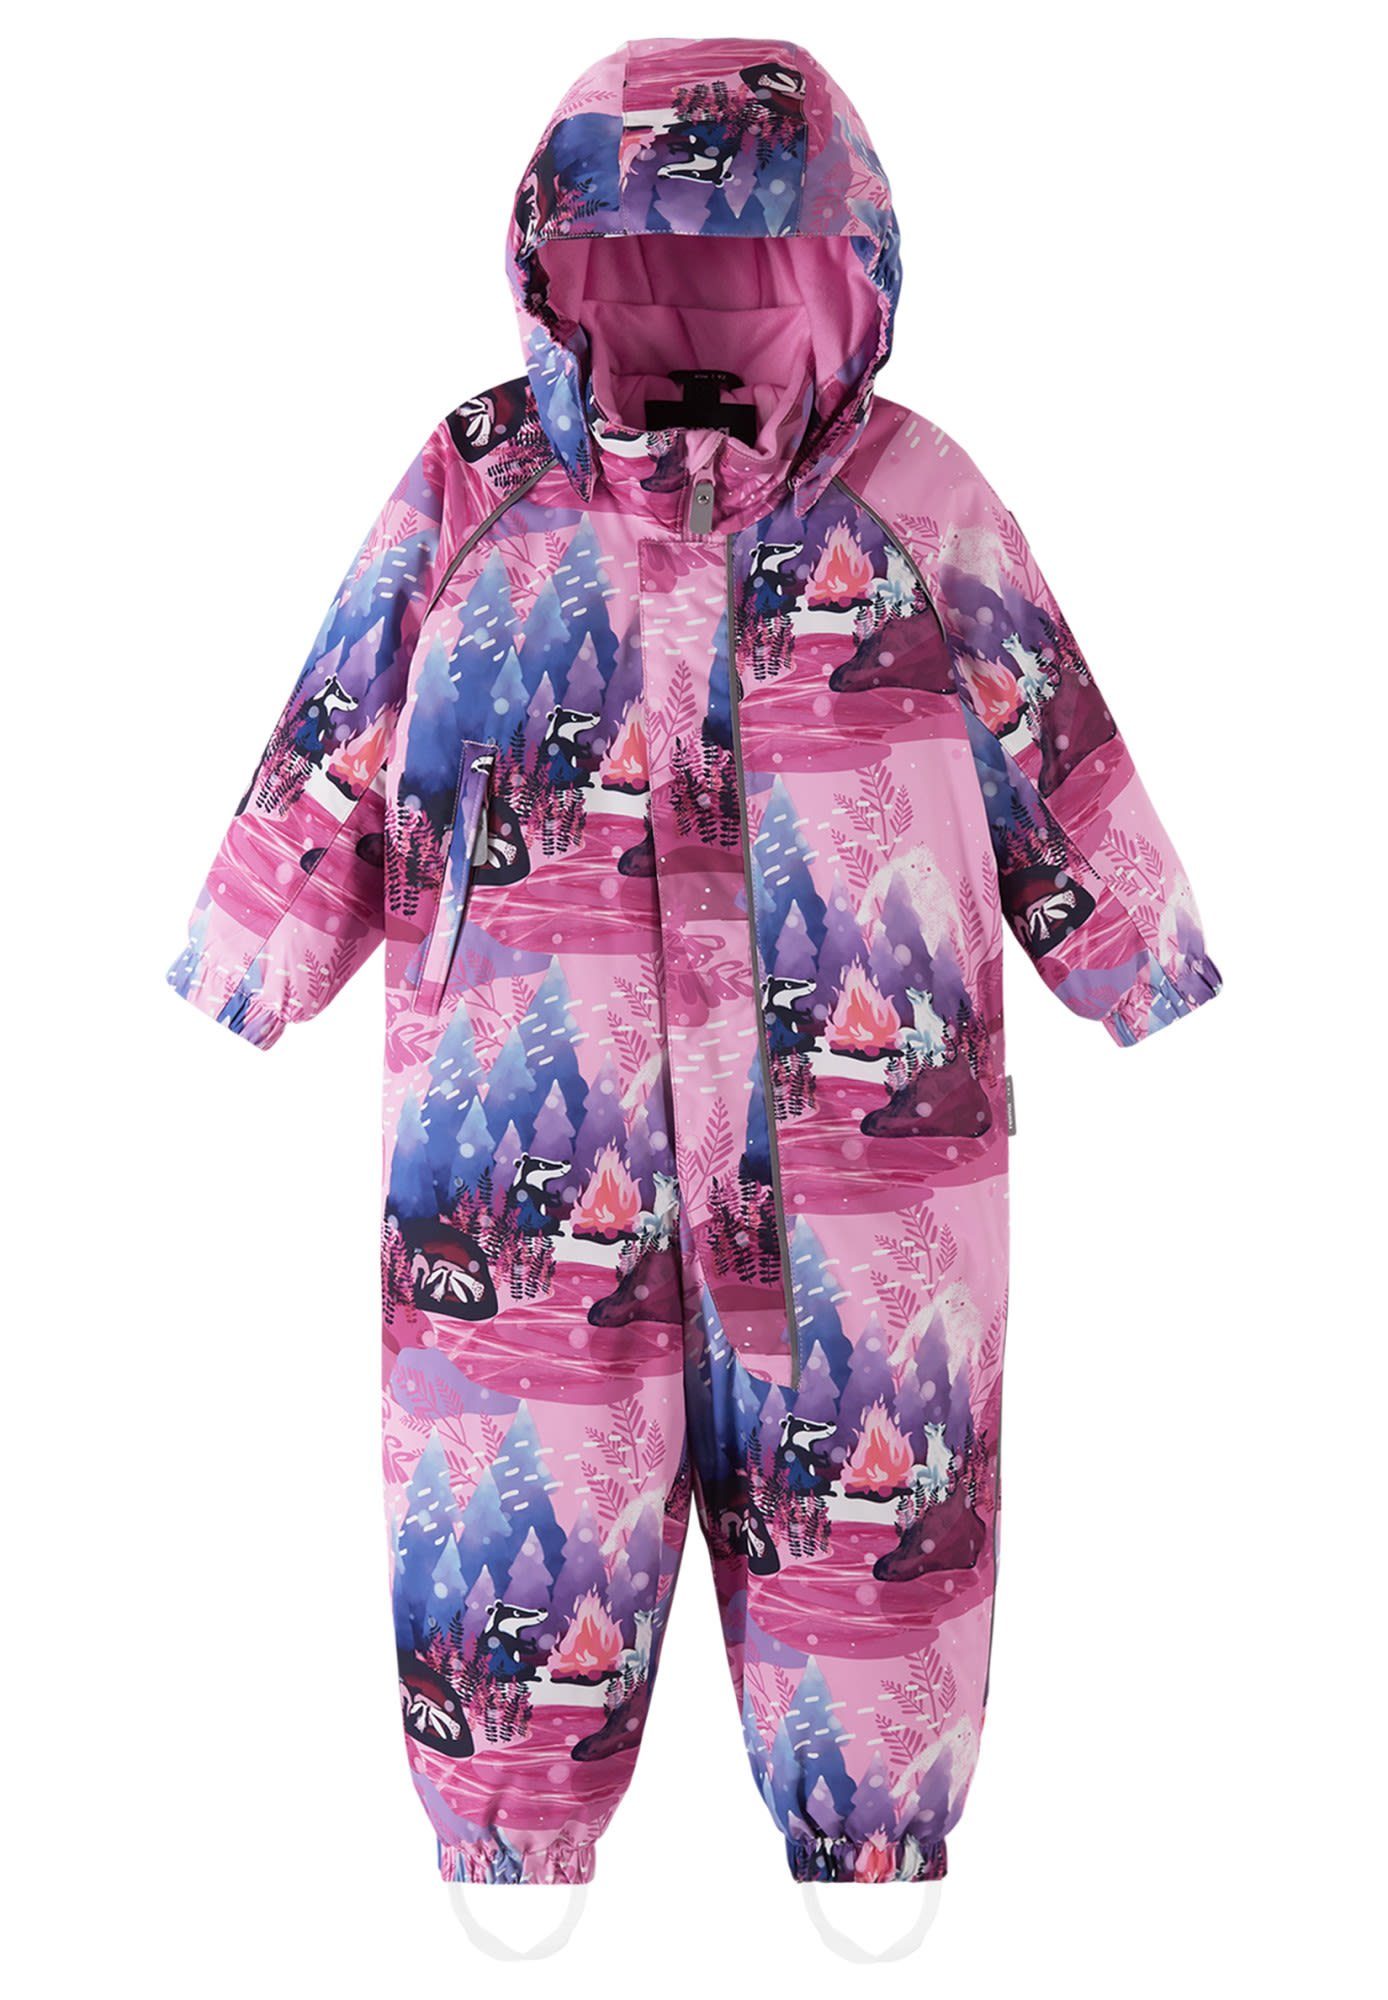 Pink Kinder Overall Overall Reima Toddlers Classic Langnes Winter reima